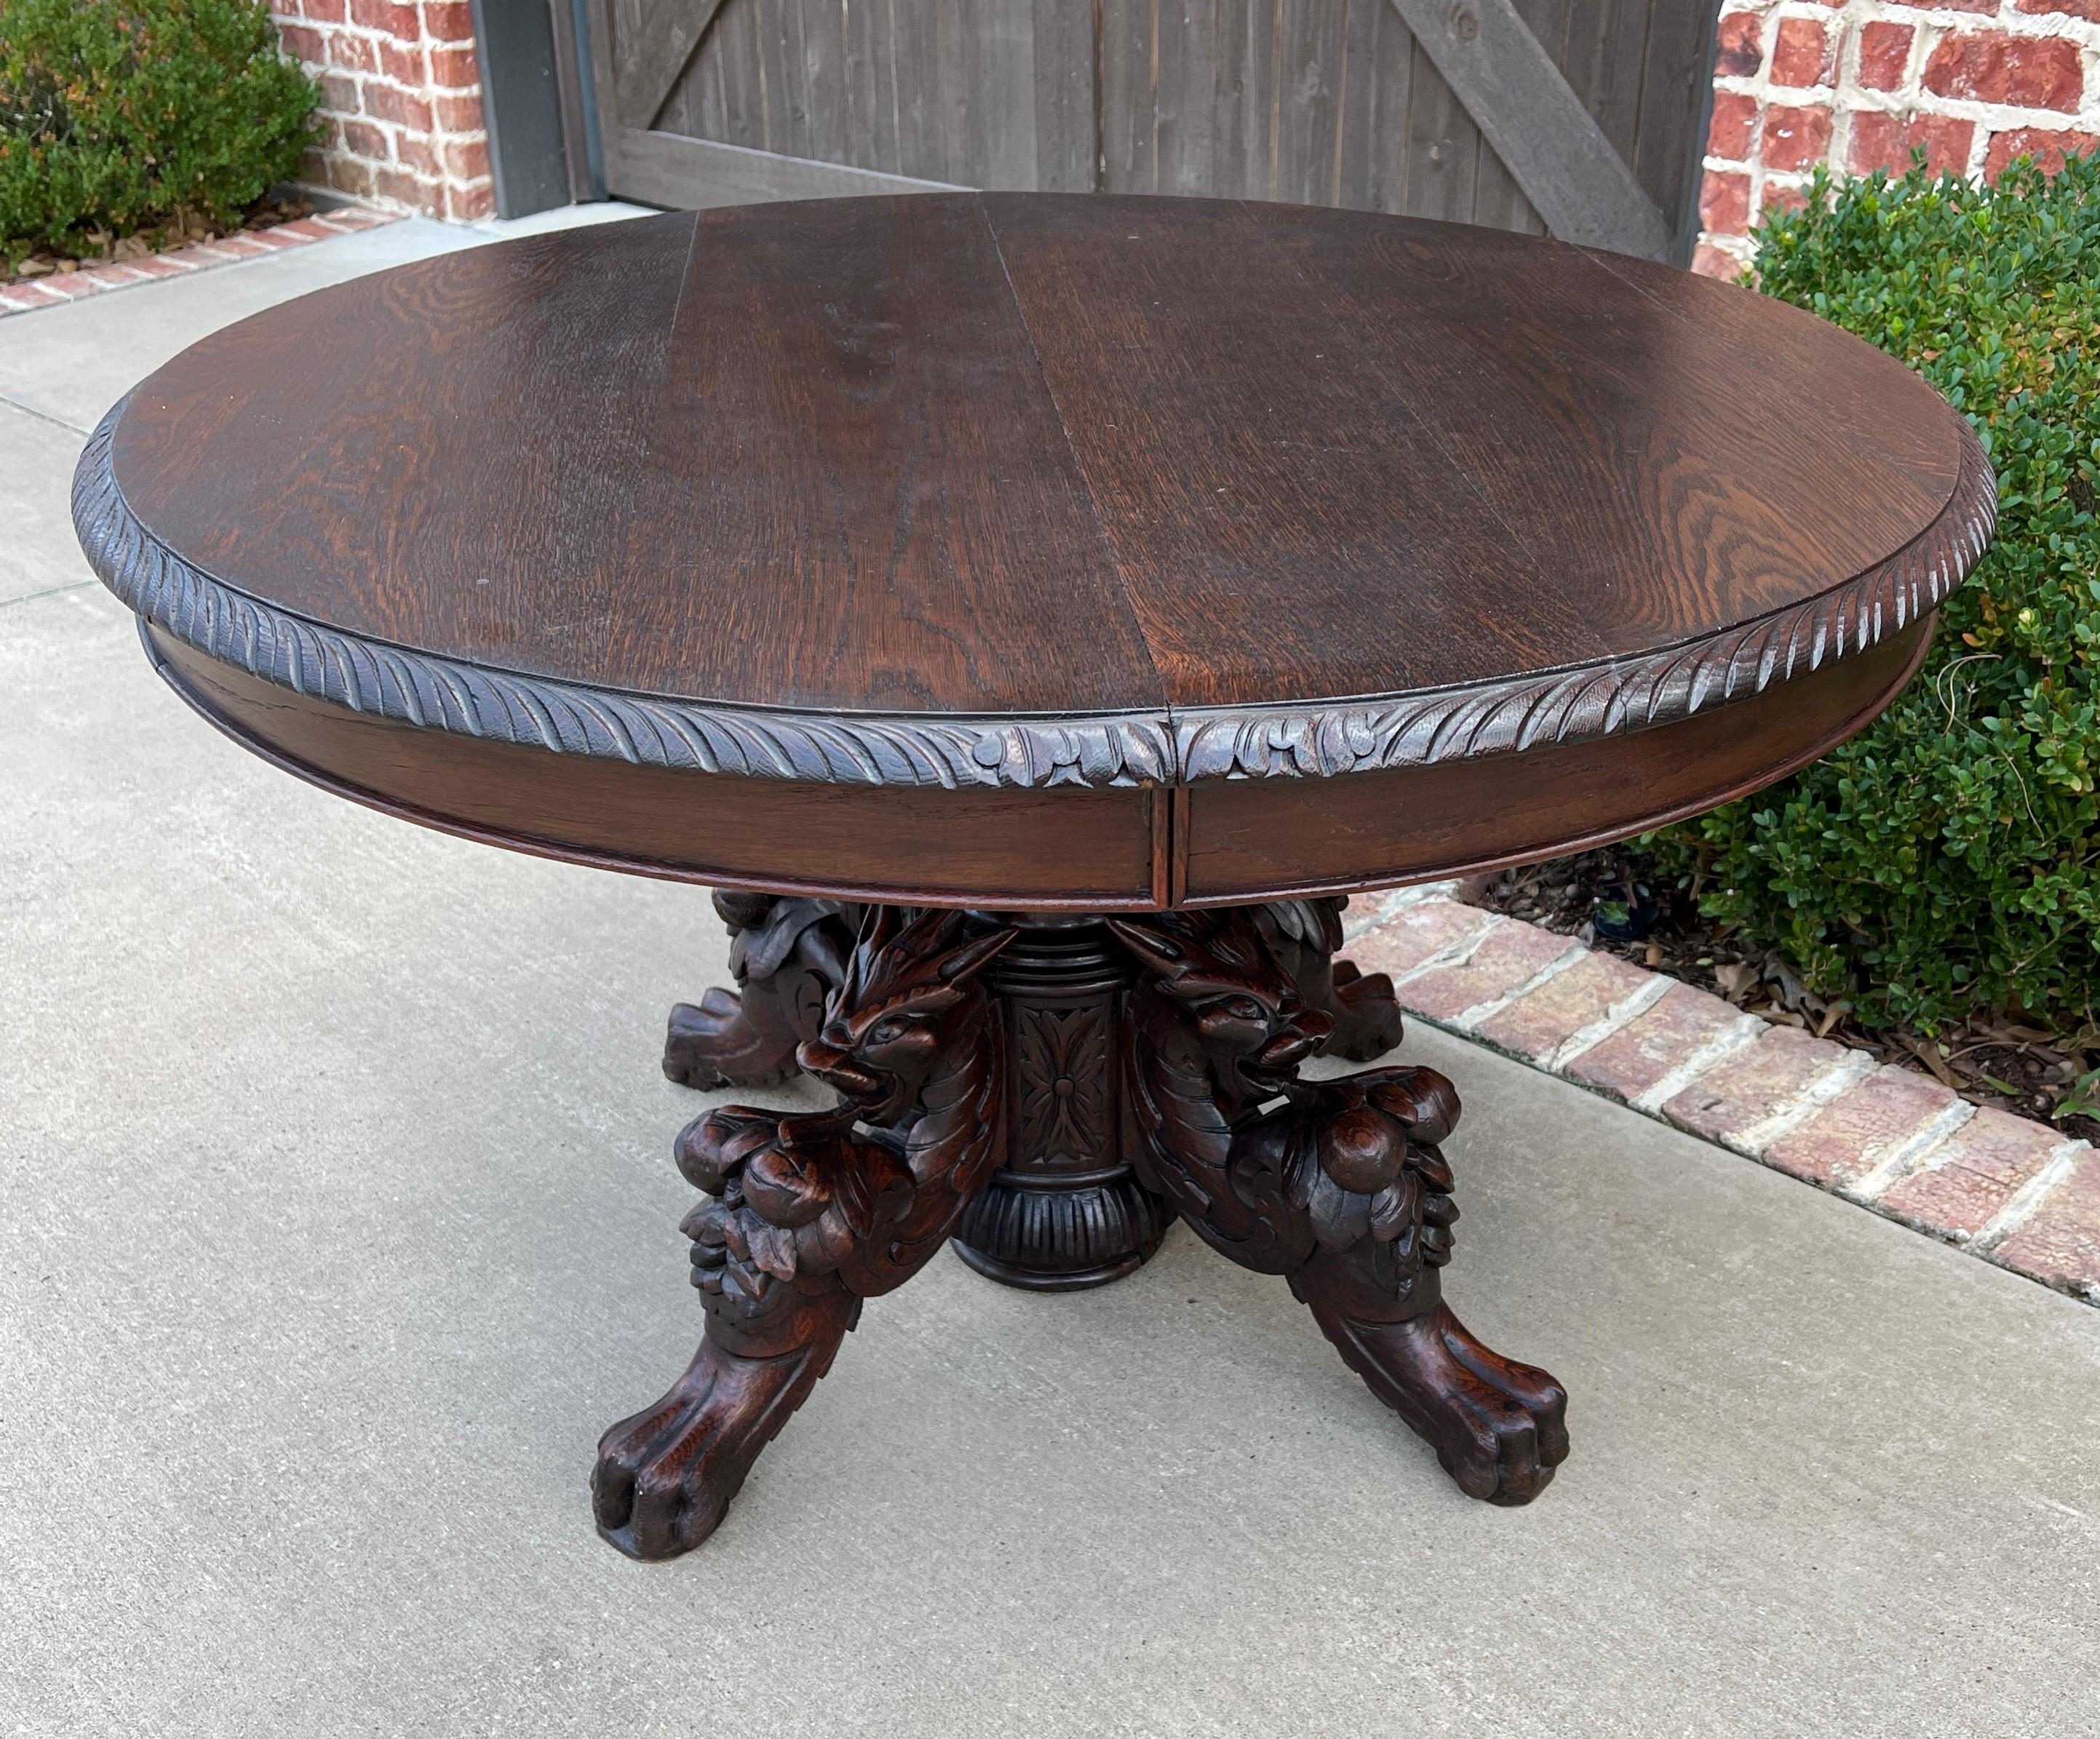 Carved Antique French OVAL Coffee Table Pedestal BLACK FOREST Hunt Table Griffons 19thC